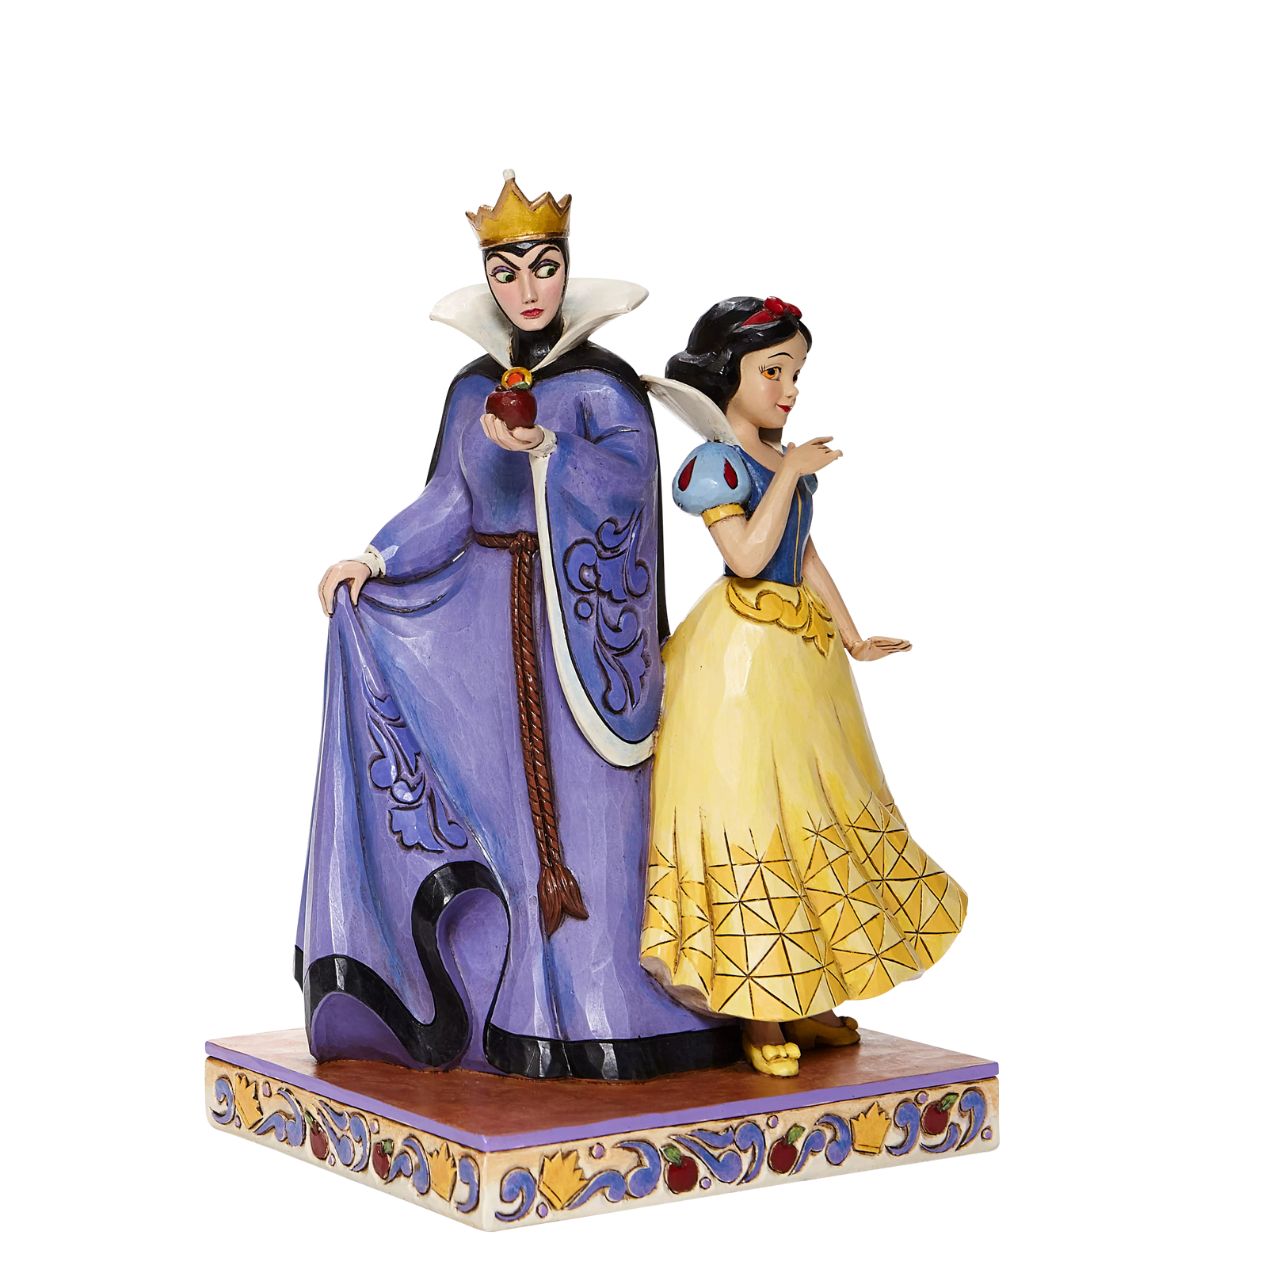 Evil and Innocence - Snow White and Evil Queen Figurine  Snow White is back-to-back with the Evil Queen in this handcrafted design inspired by the Disney classic. Richly detailed, this compelling scene of good and evil features the vibrant colour and folk-art motifs that are unmistakably Jim Shore.